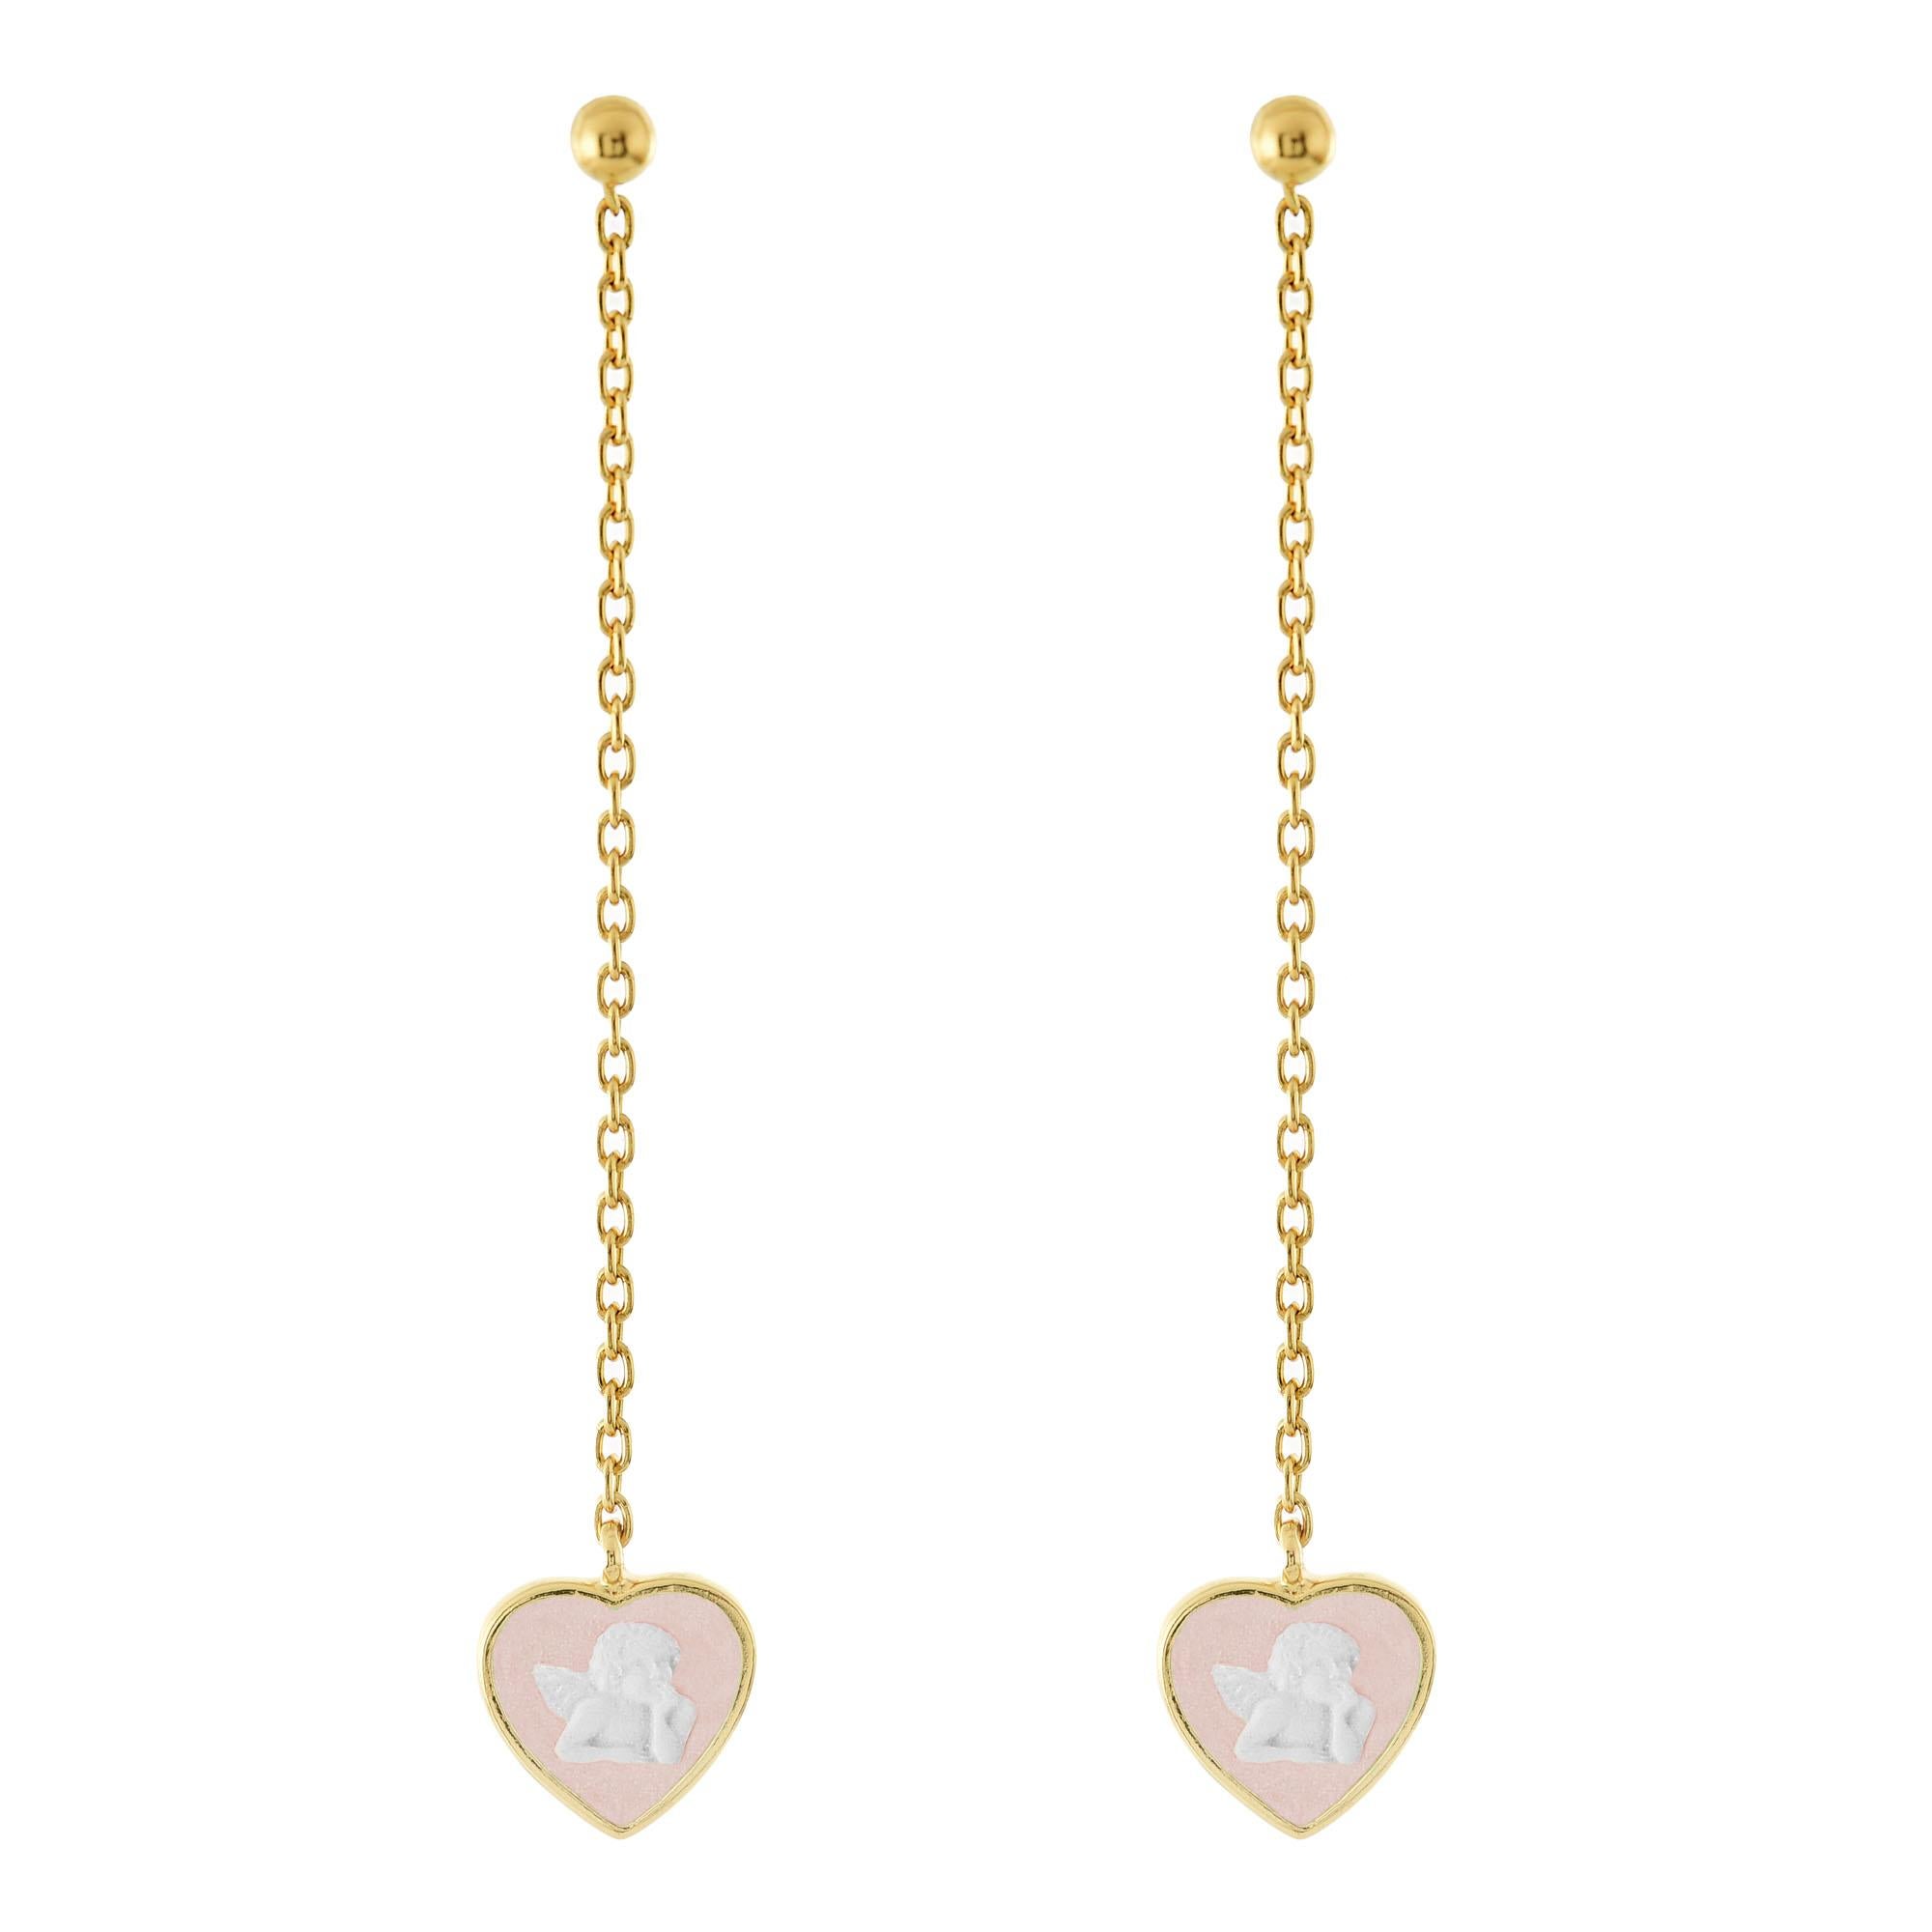 Beautifully hand crafted porcelain cameo earrings mounted in 18k gold plated sterling silver. With a delicate look these chain earrings depict little cherubs, one of the most classic subject of cameo making. Available in pink, turquoise, lilla,